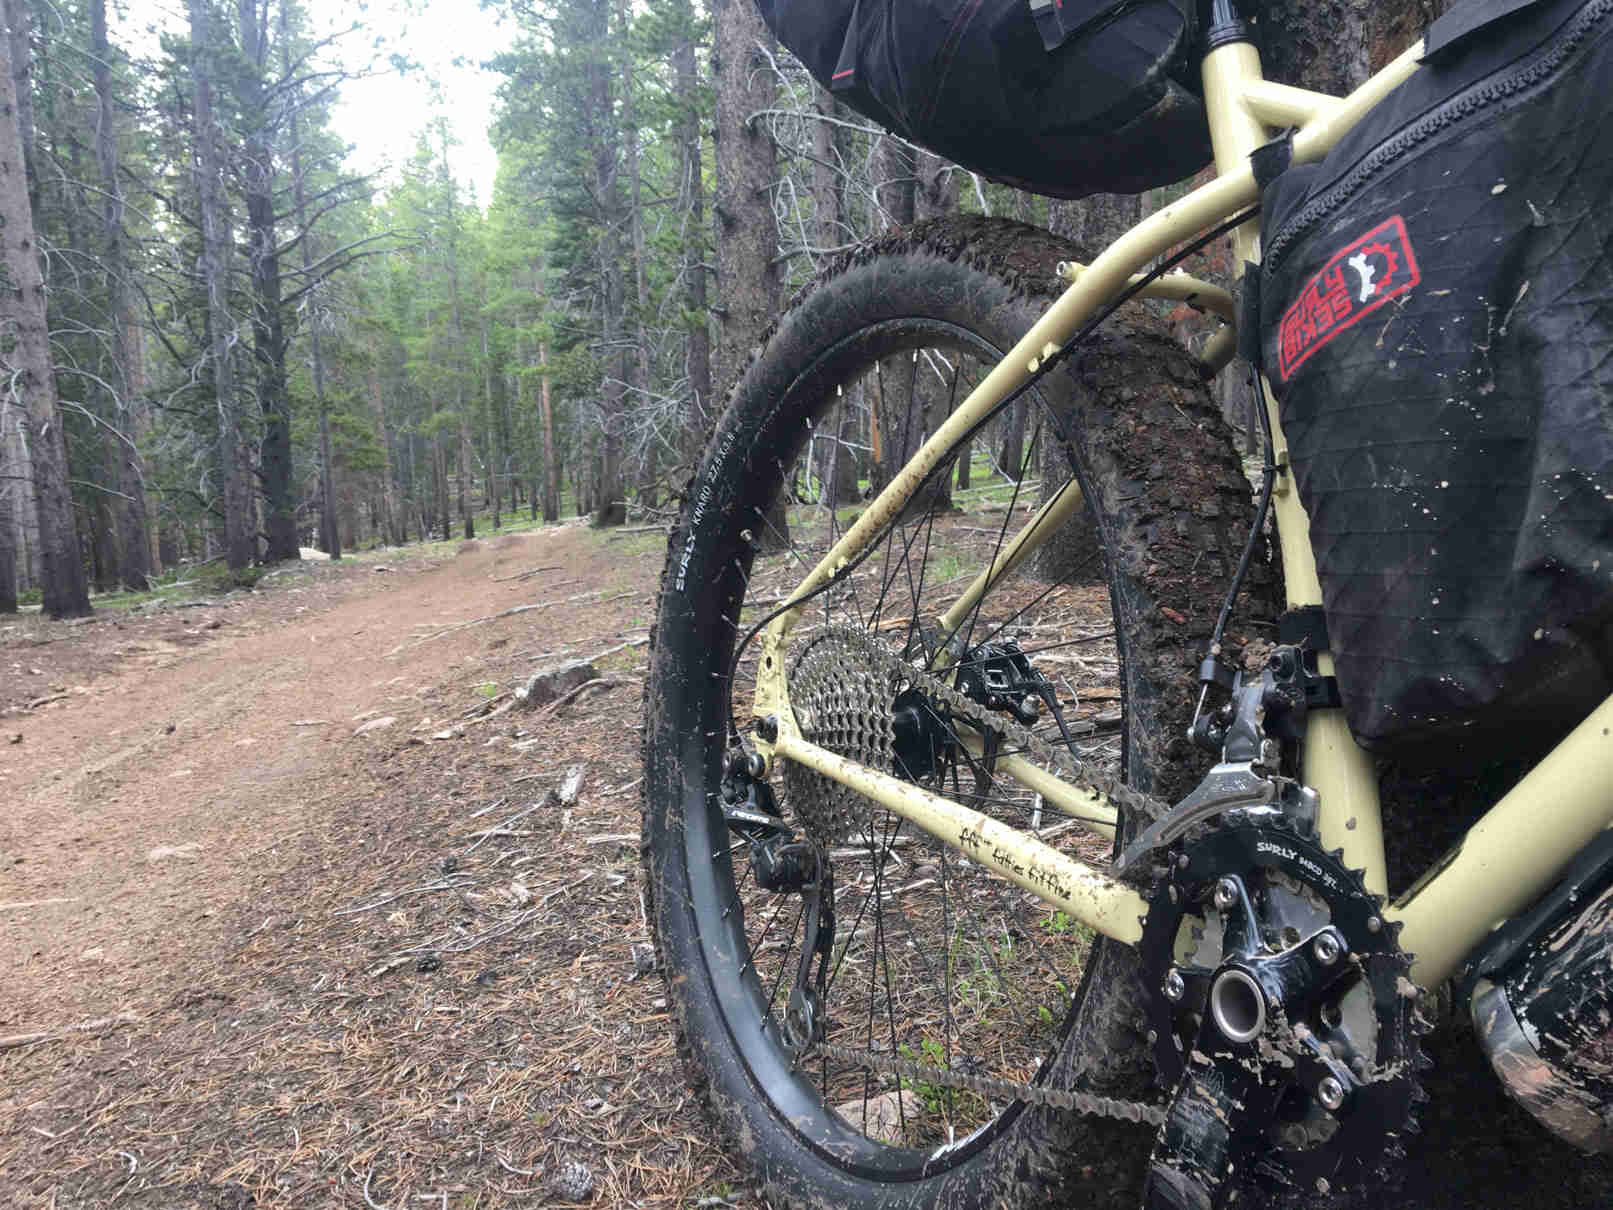 Right side, back end view of a tan Surly ECR bike, on the side of a dirt trail in a pine forest 